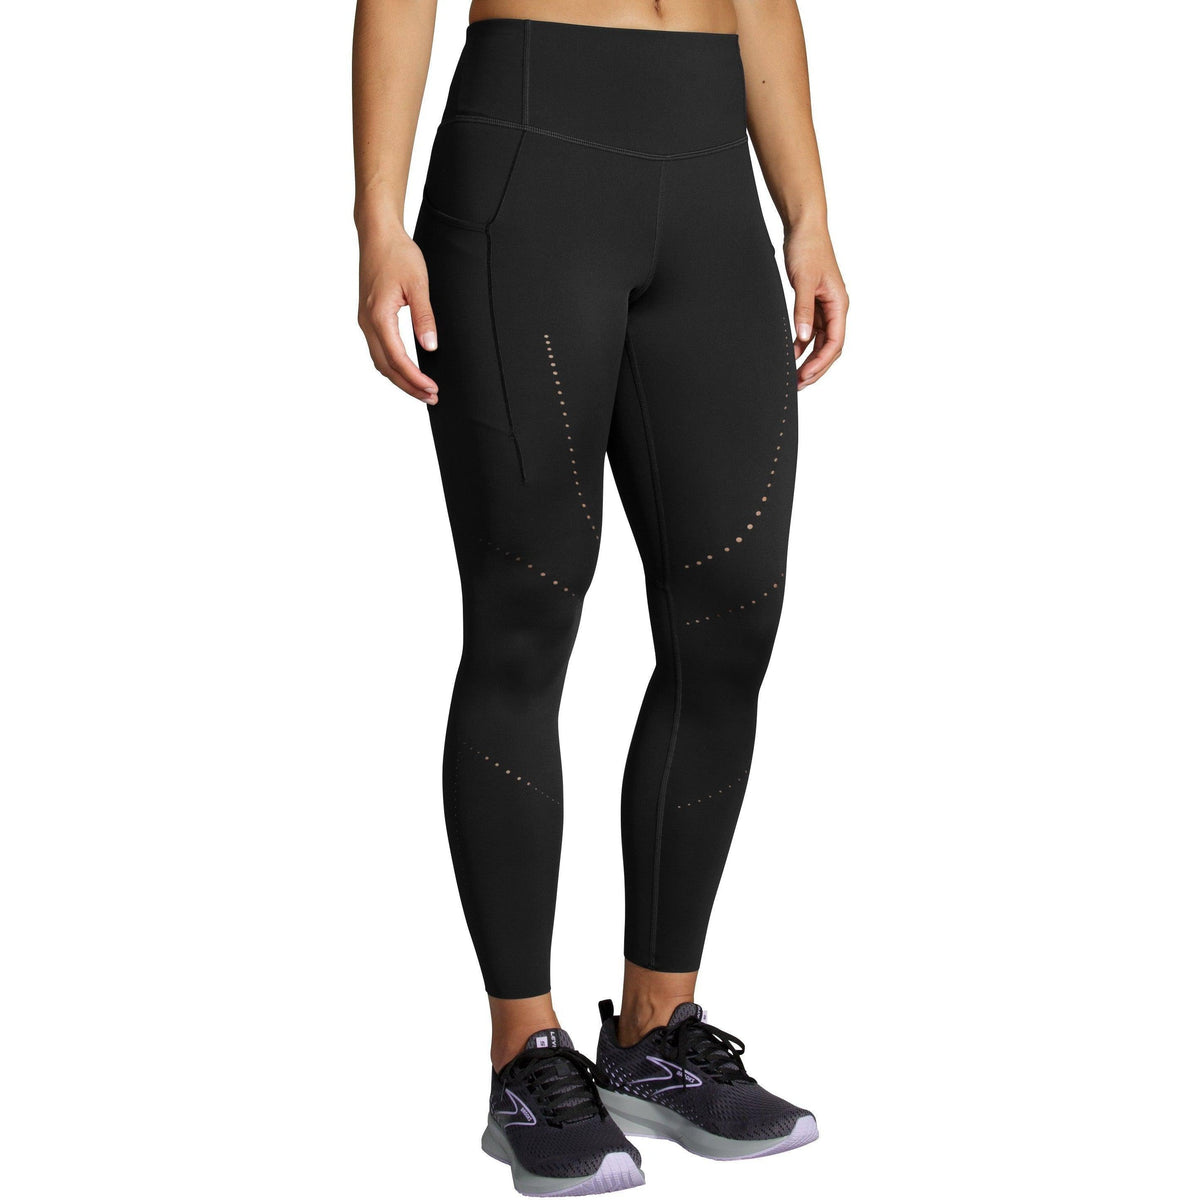 Brooks Seattle Running Tights IN - Northern Ice and Dance